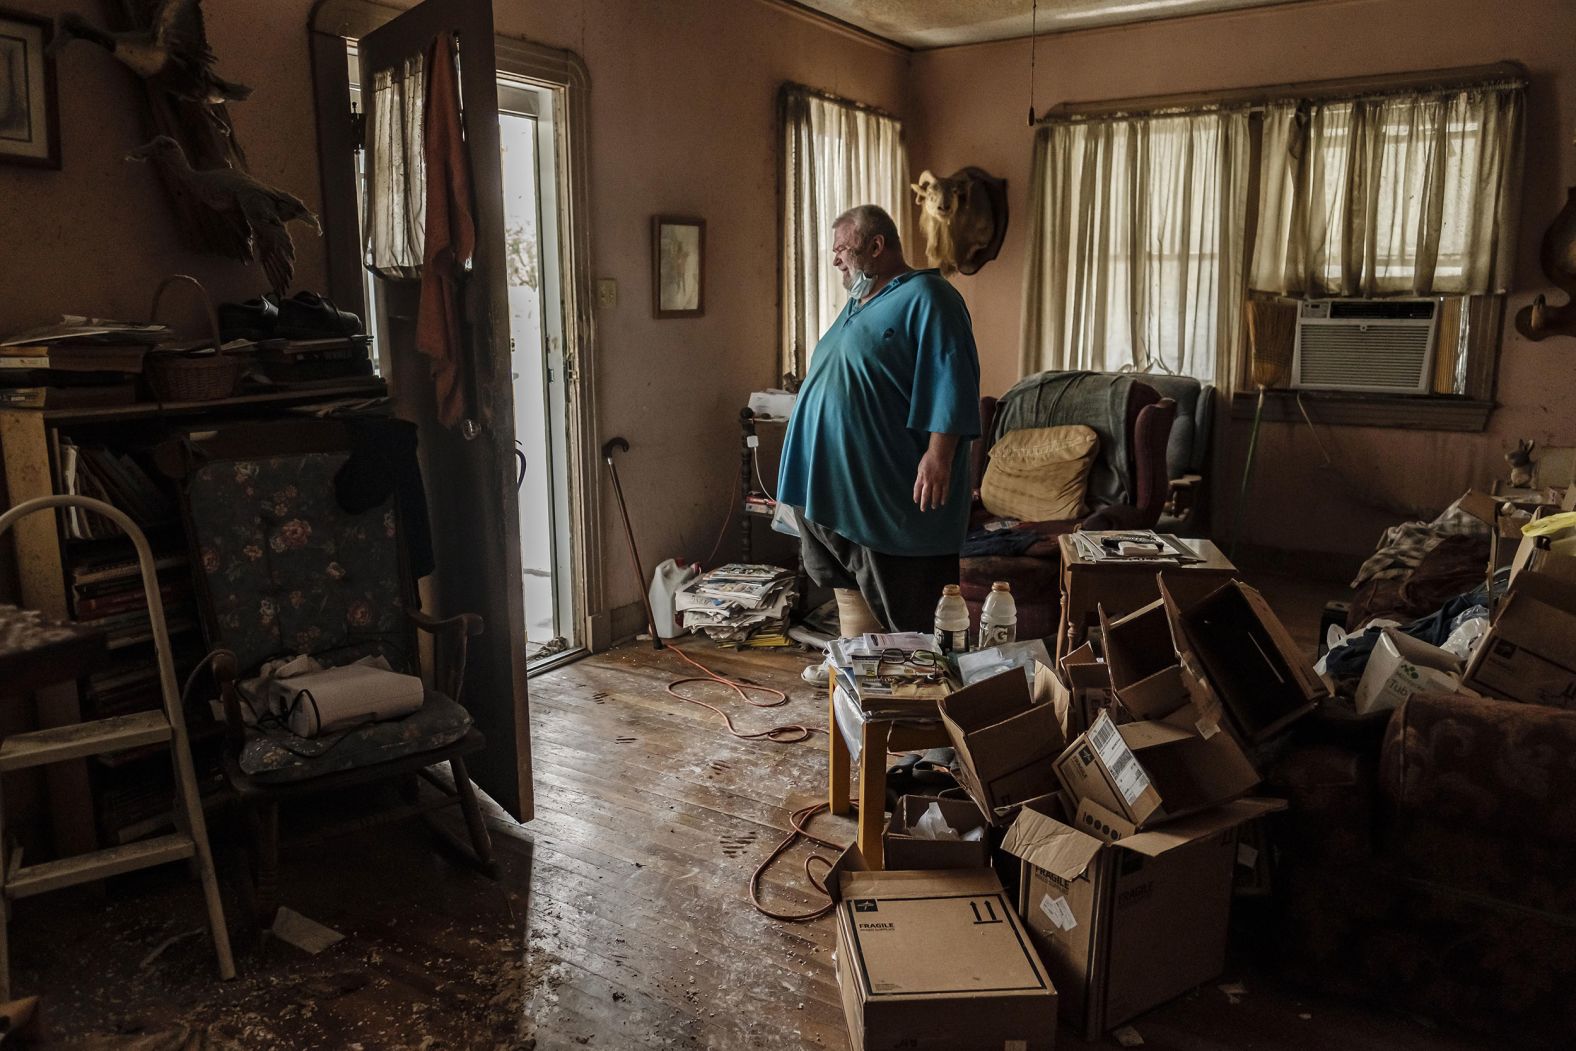 Michael Wilson stands in the doorway of his flood-damaged home in Norco, Louisiana, on August 30.